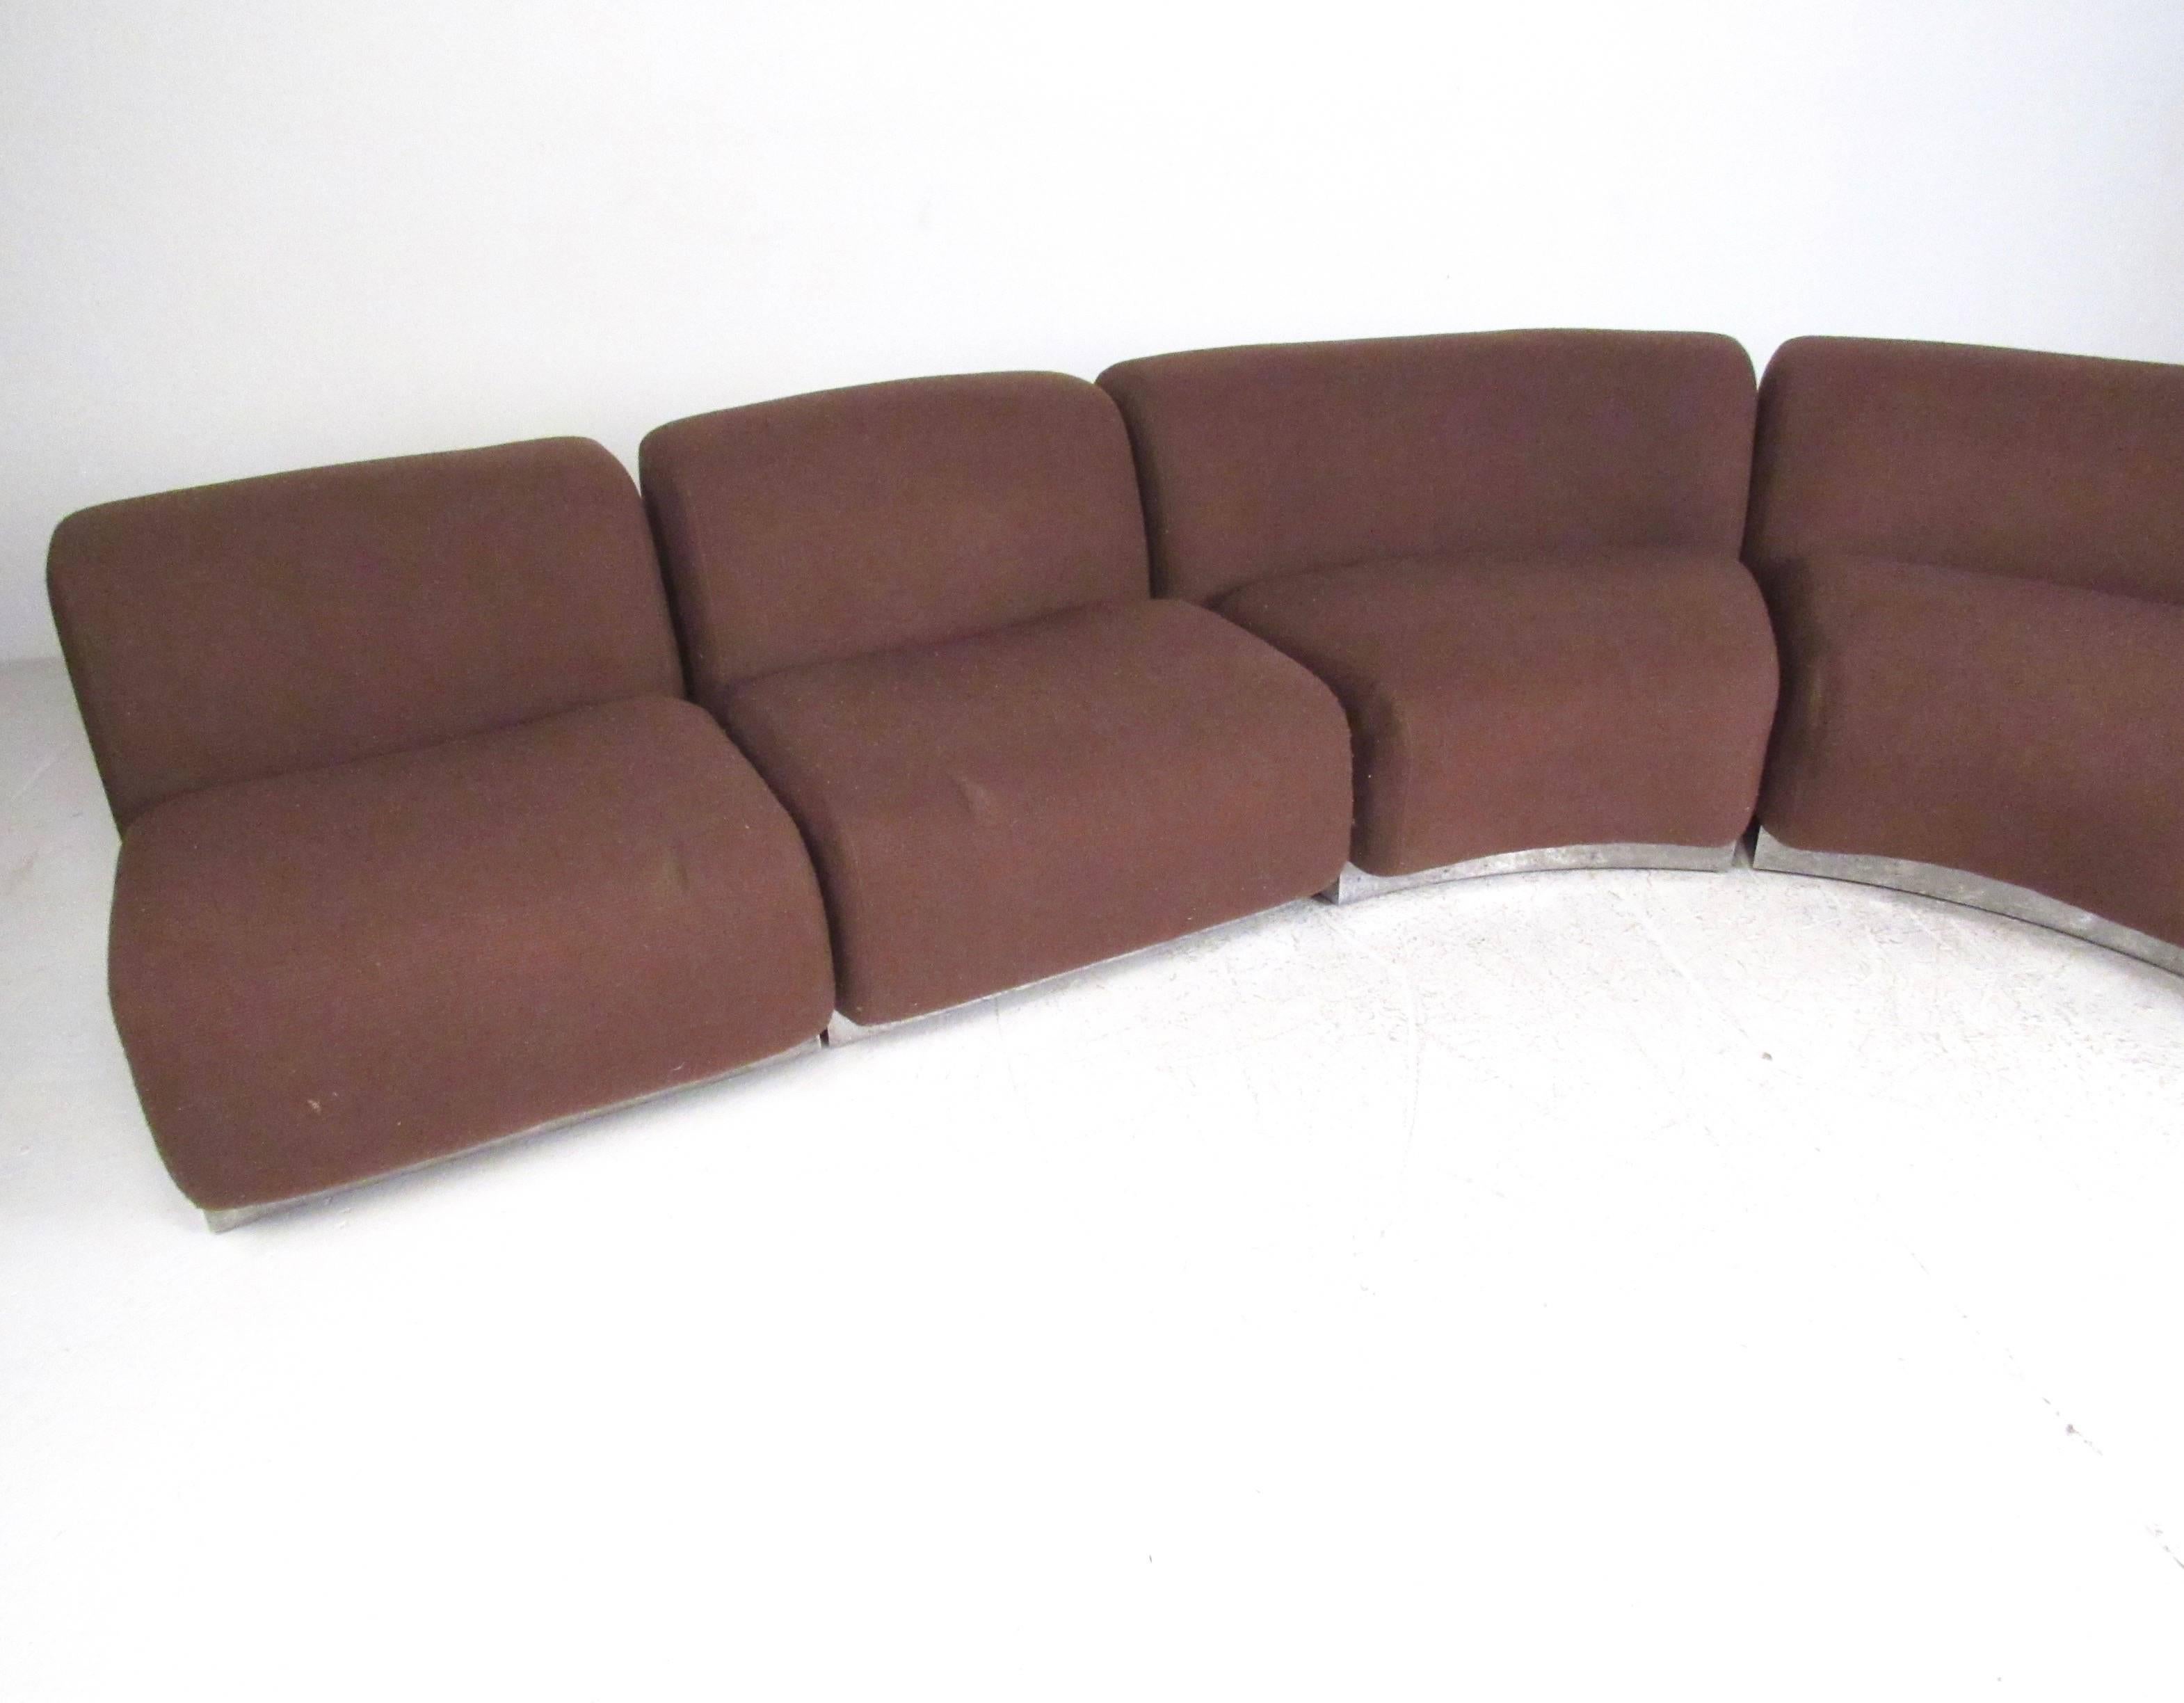 This unique Mid-Century Modern five piece sectional sofa features a low-profile club design and plush upholstered seats. Stylish metal trim covers a hardwood base, while vintage brown upholstery adds to the mid-century appeal. This impressive